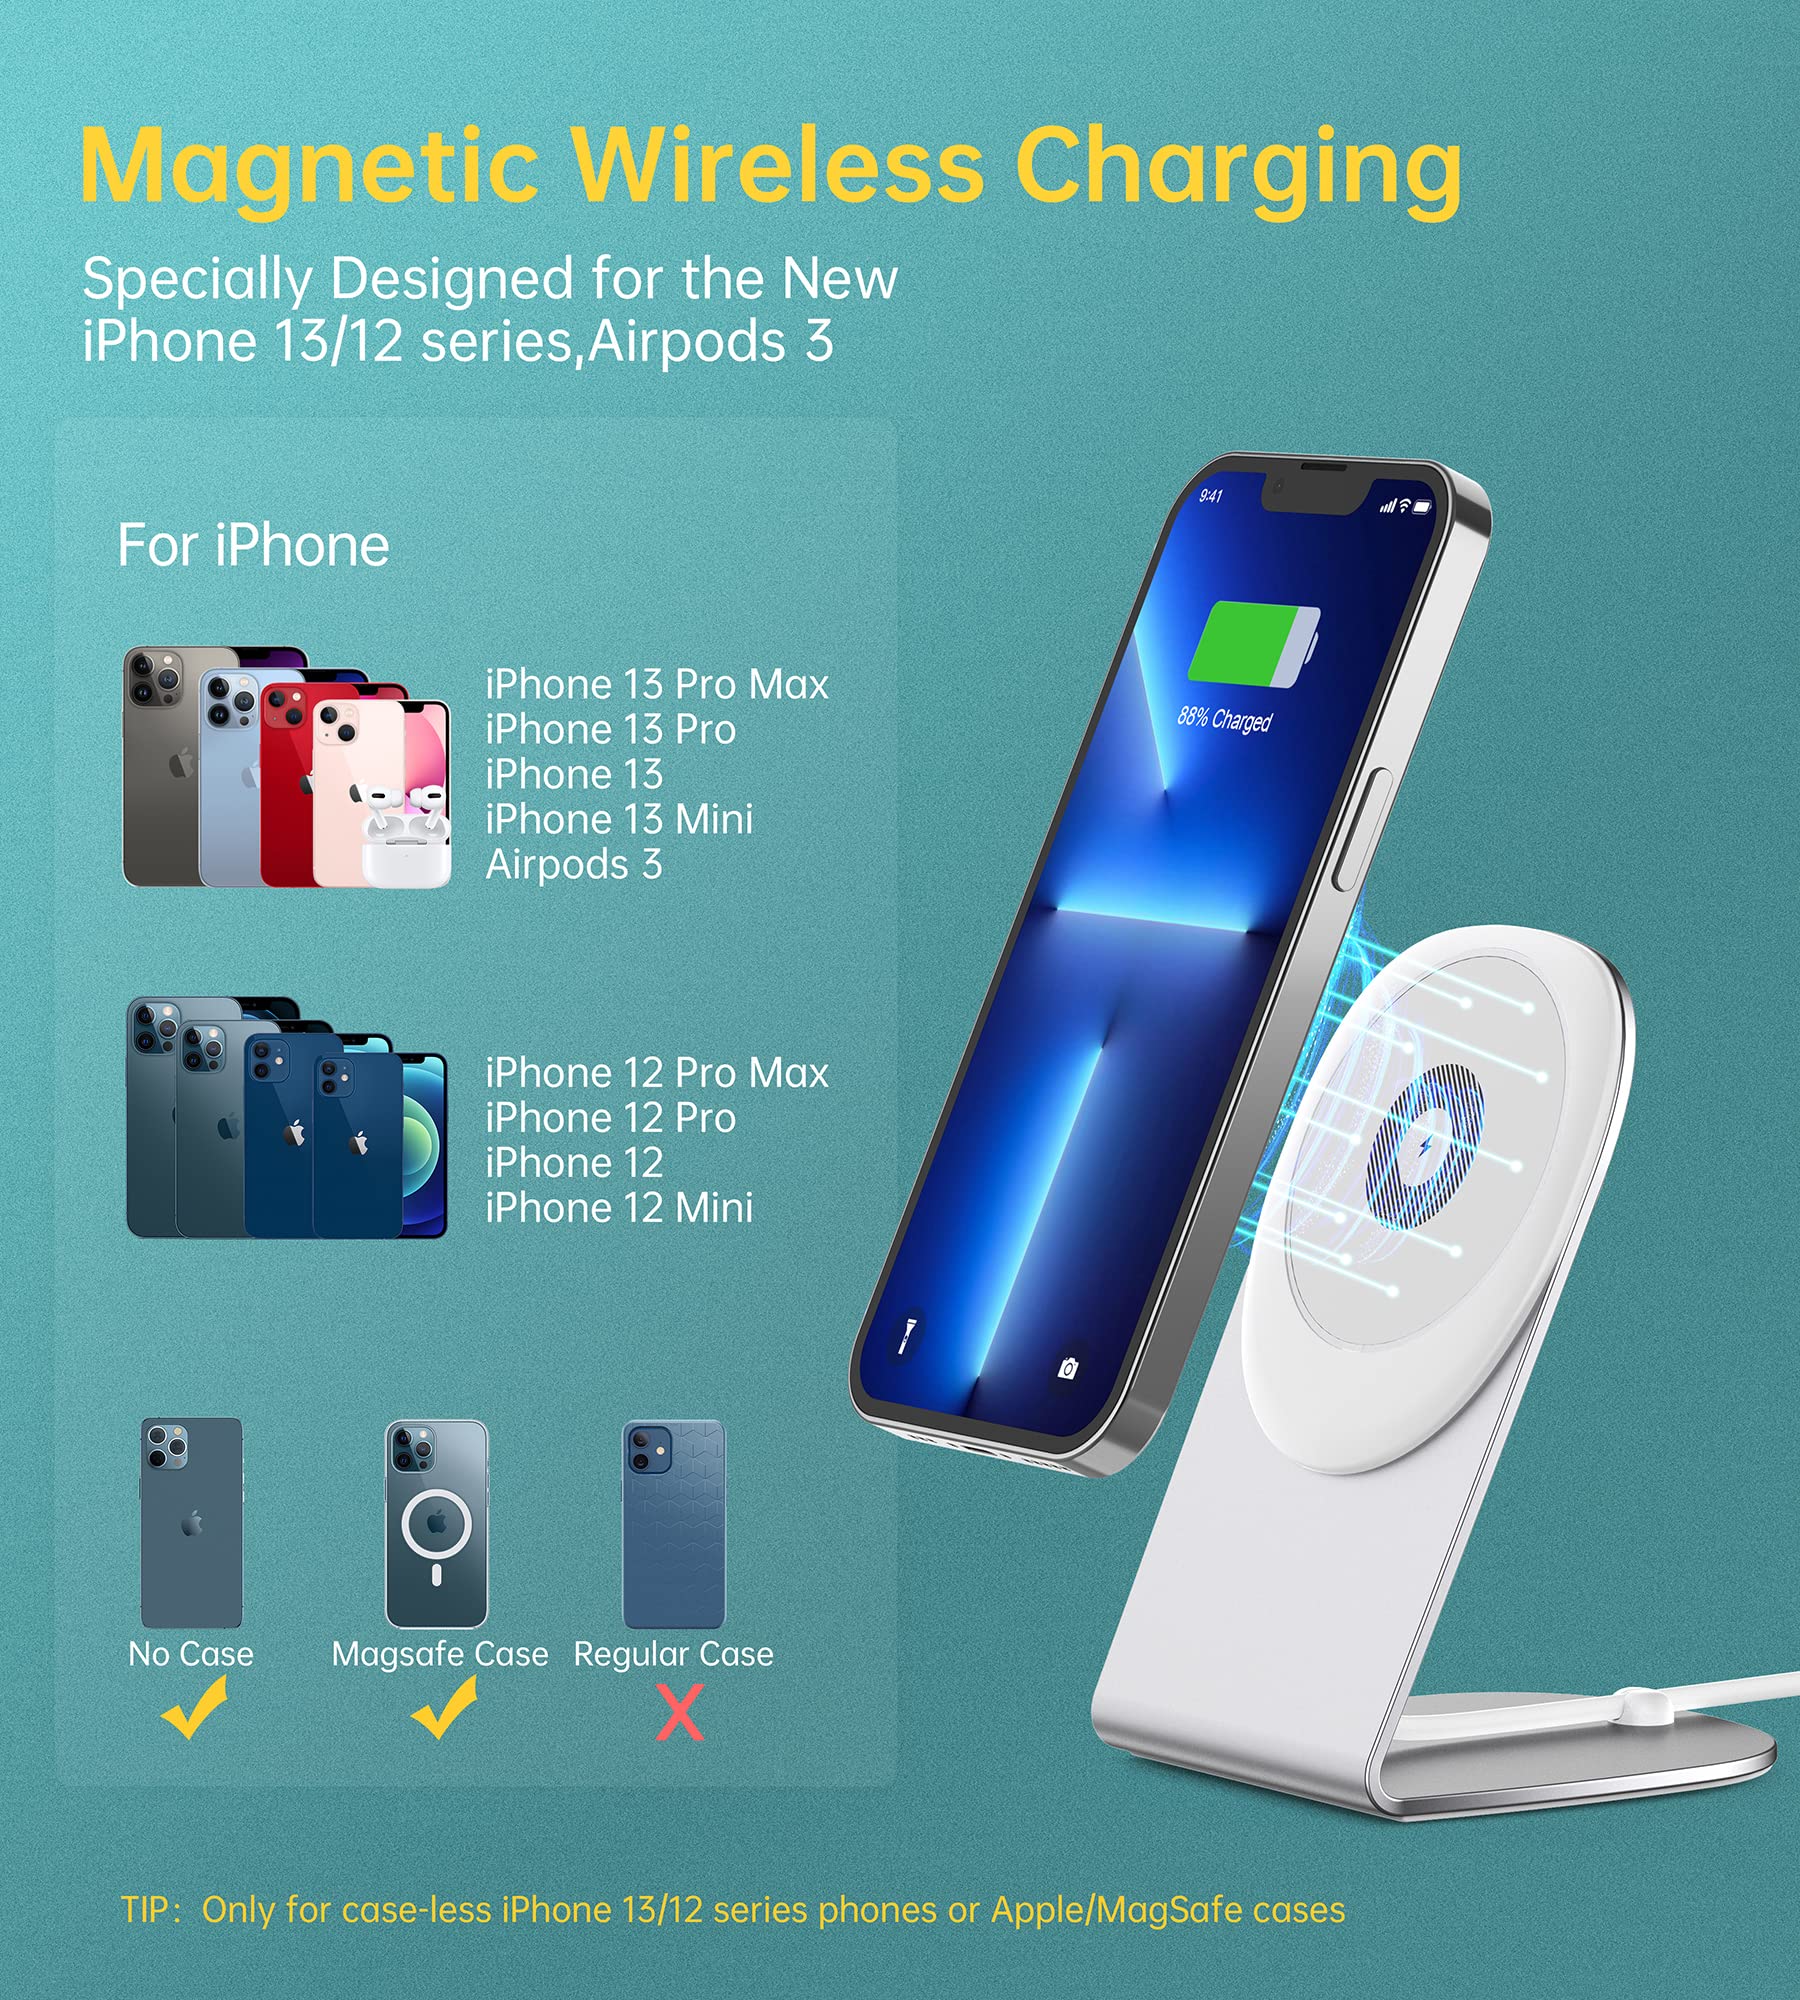 RoRoSkin Magnetic Wireless Charger - Convertible Fast Wireless Charging Stand/Pad with 5ft USB-C Cable Compatible with Mag safe iPhone 13 12 Pro Max Mini,Airpods 3 (with 20W Charger)